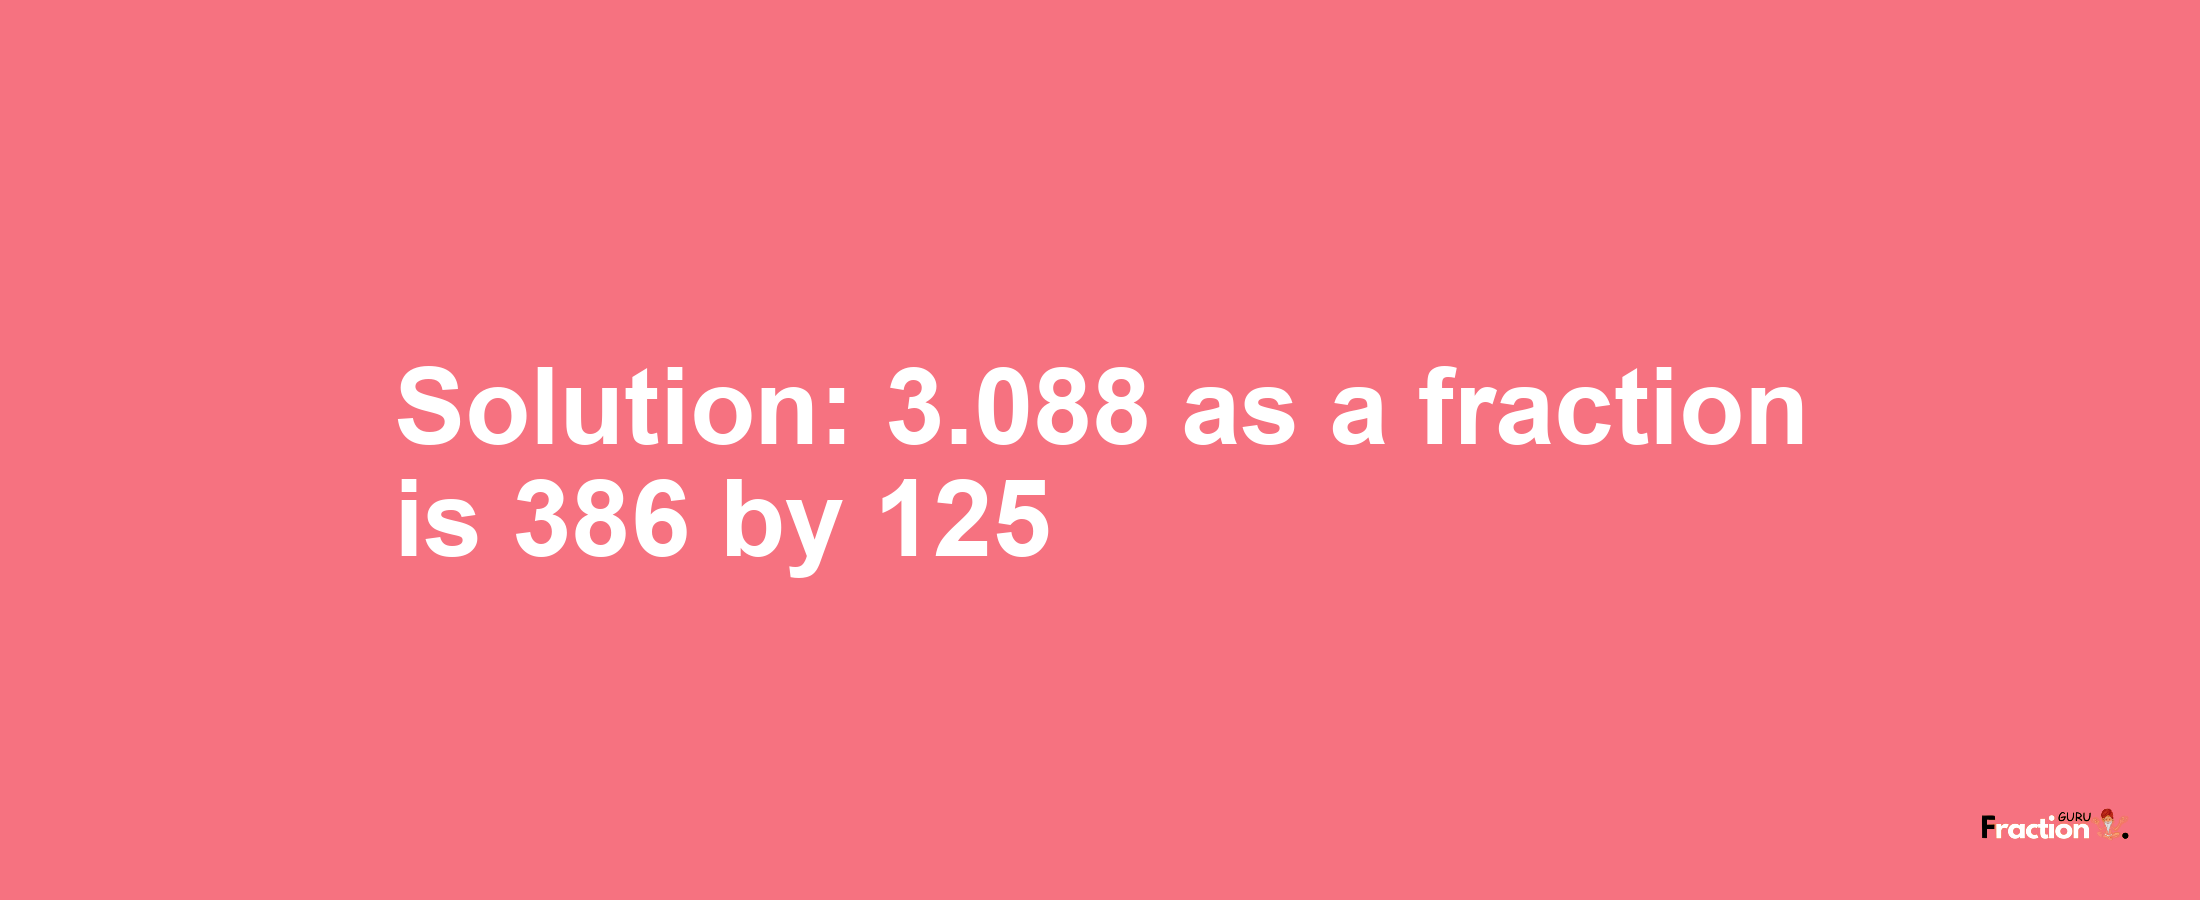 Solution:3.088 as a fraction is 386/125